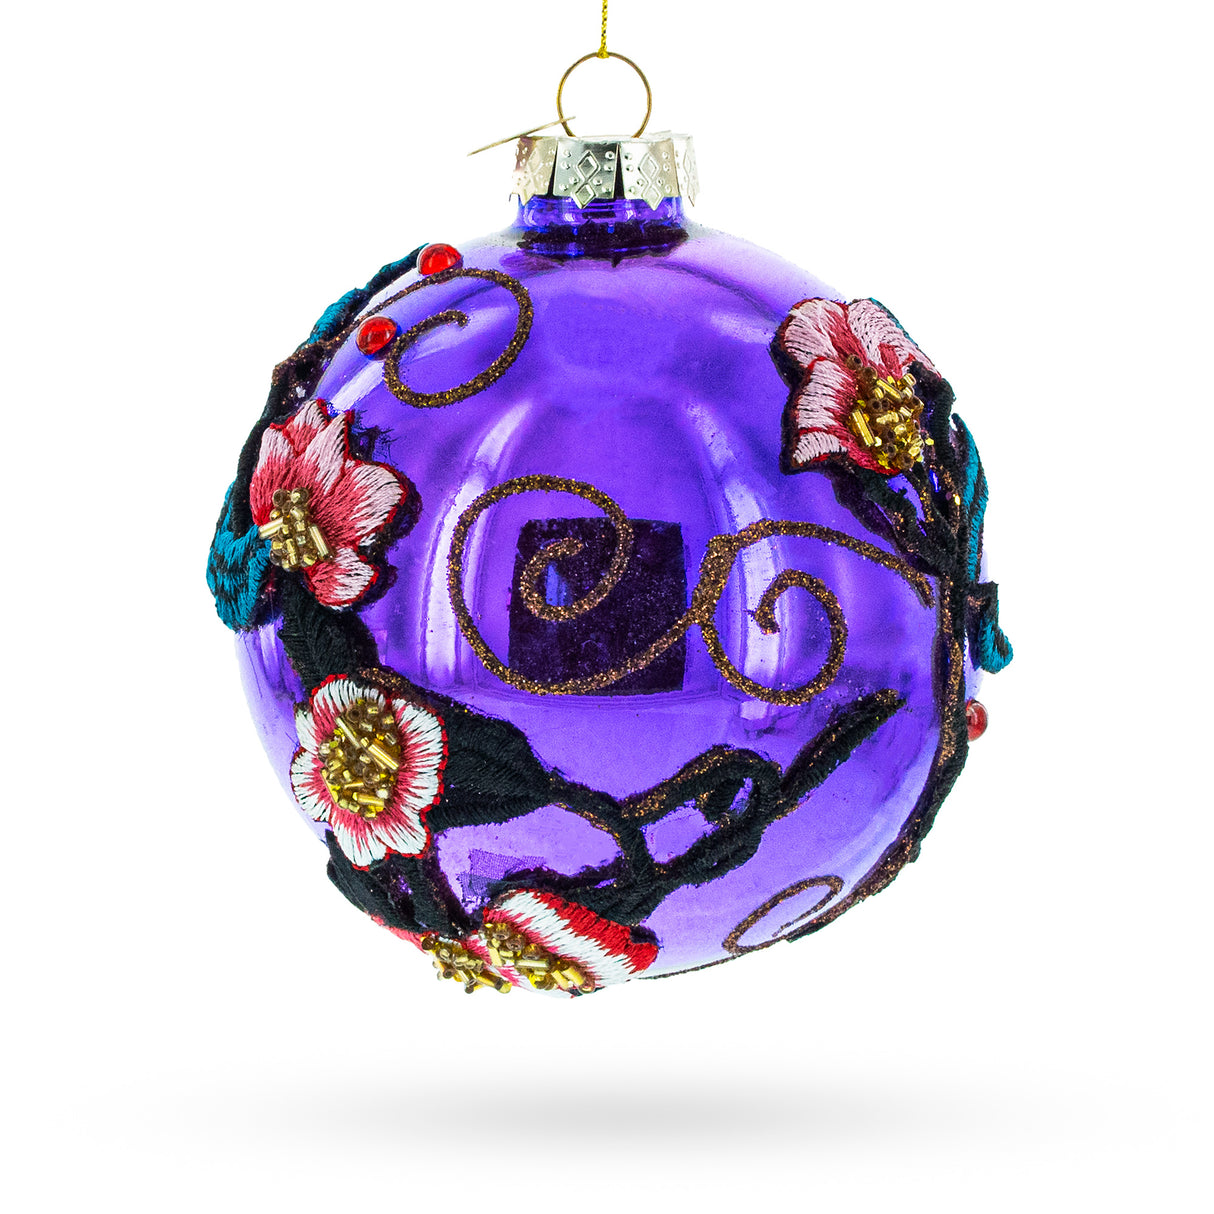 Intricate Embroidered Flowers on Purple Blown Glass Ball Christmas Ornament in Purple color, Round shape